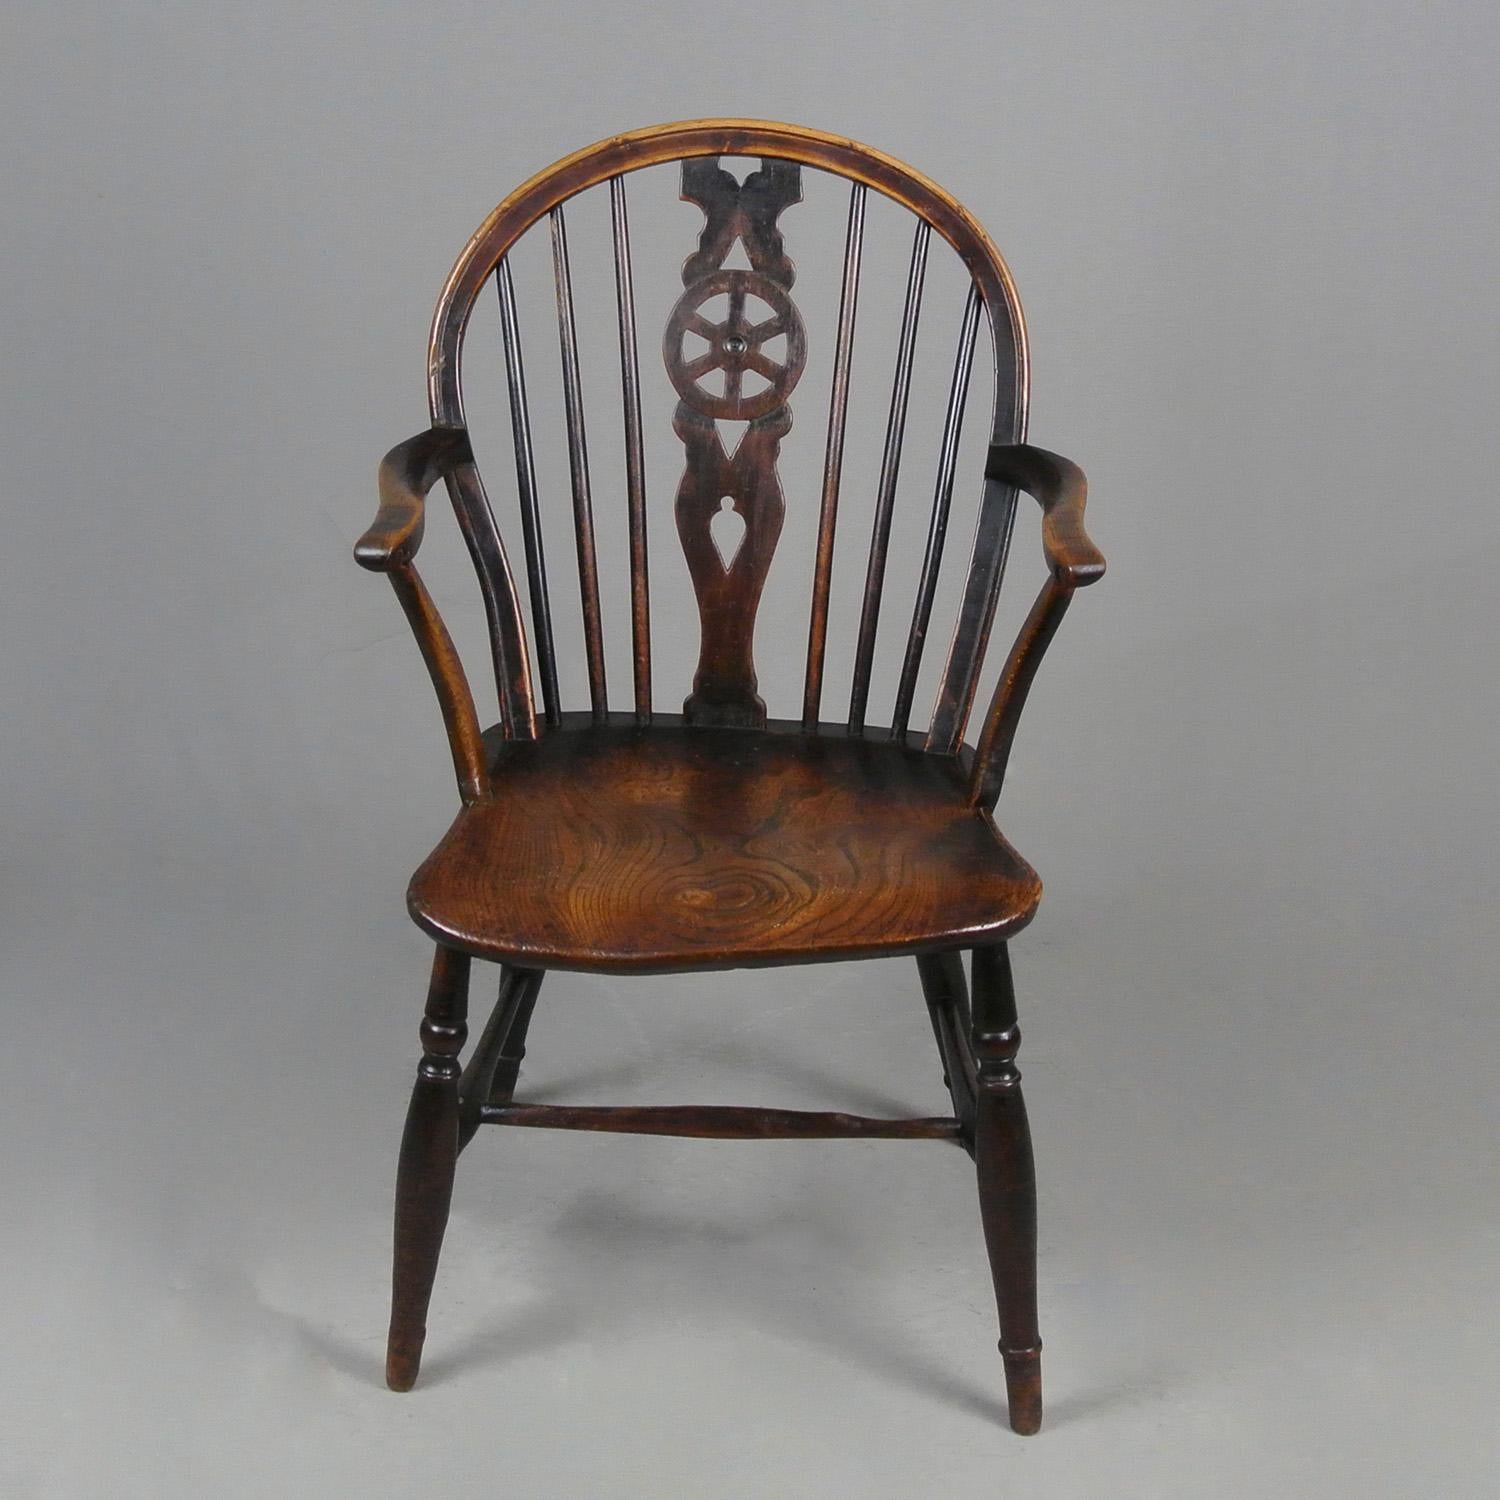 Early Thames Valley Windsor Wheel Back Chair c. 1800 In Good Condition For Sale In Heathfield, GB